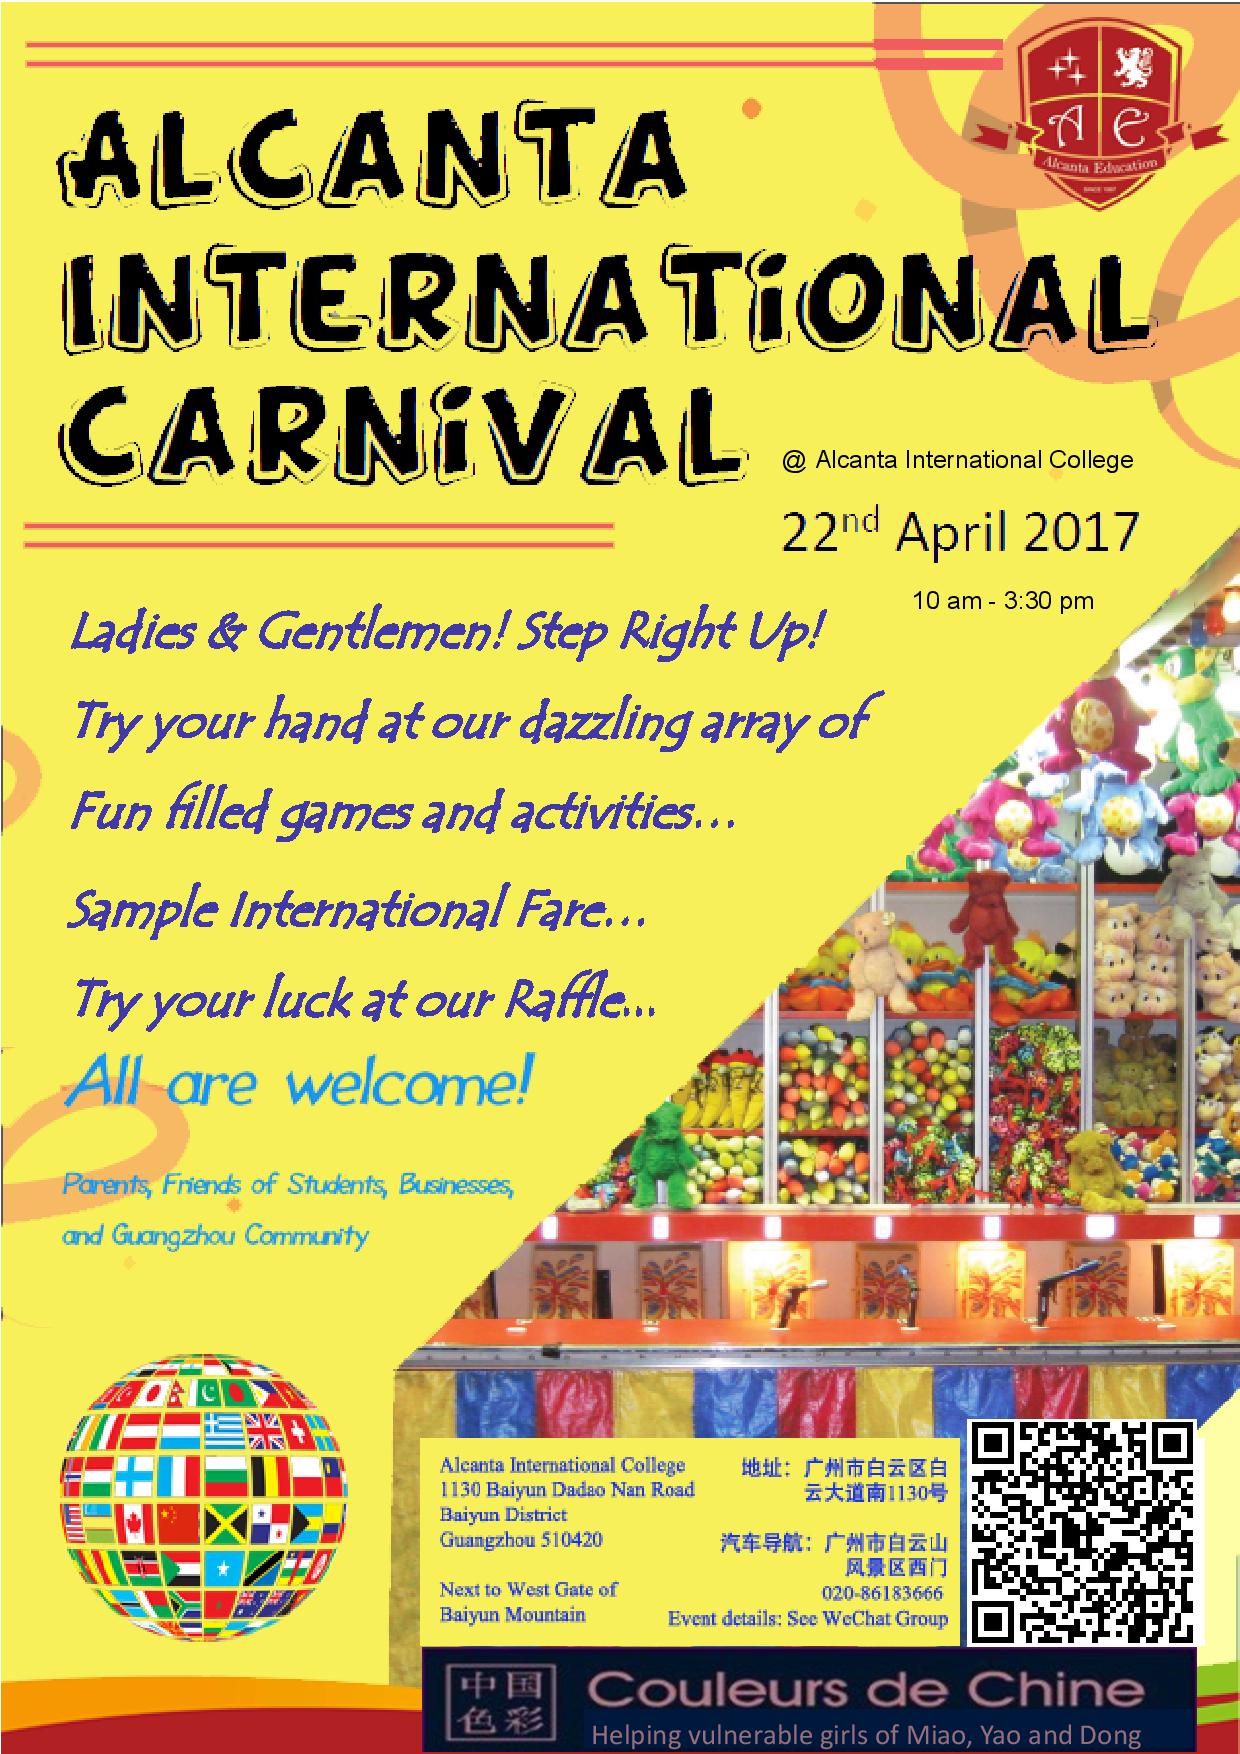 Alcanta-Interntaional-Carnival-Poster-1st-April-3-page-001.jpg